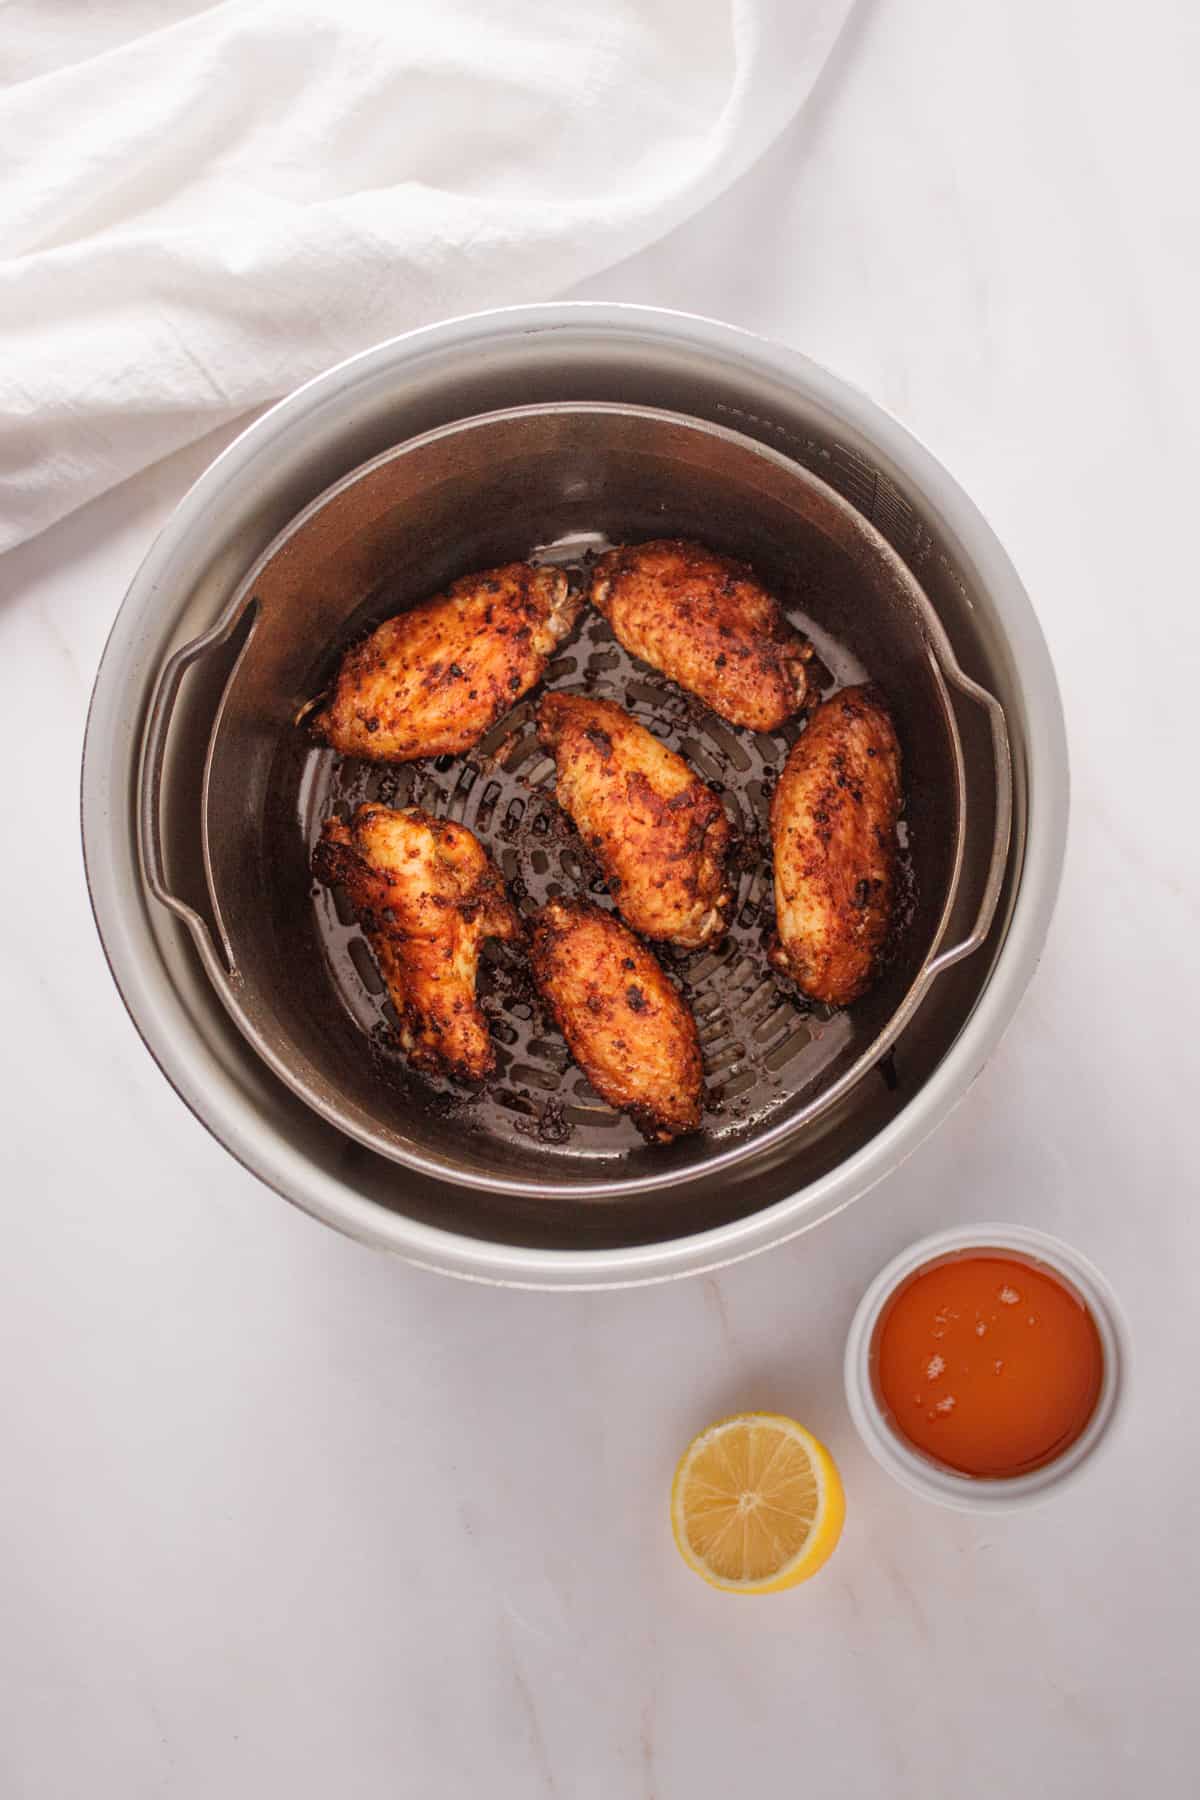 Cooked chicken wing pieces in the air fryer.